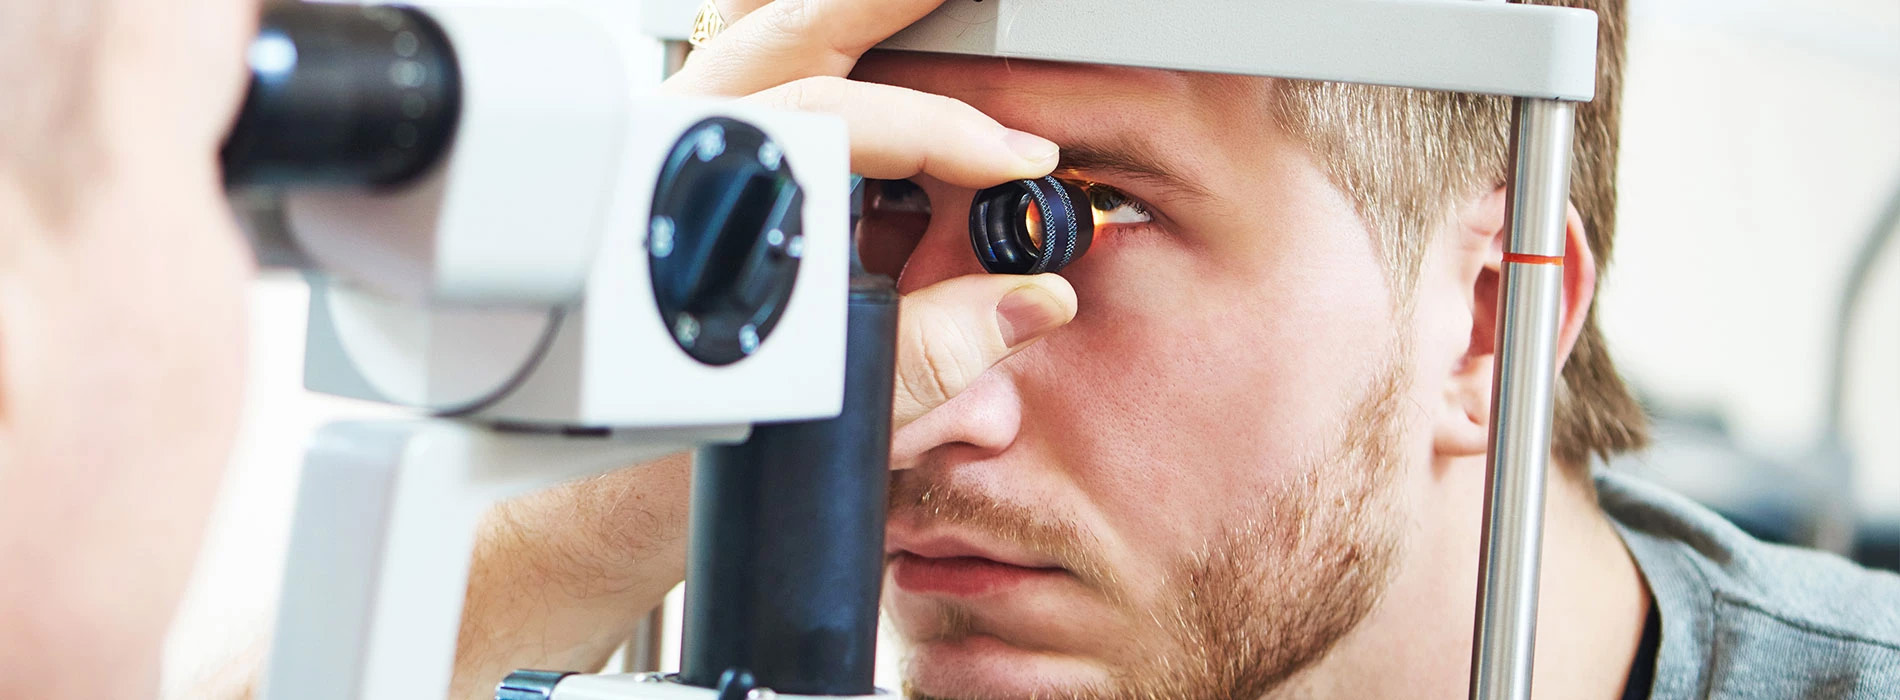 The image shows a person sitting in front of an eye exam machine, with a focus on their eyes and the device they are using.